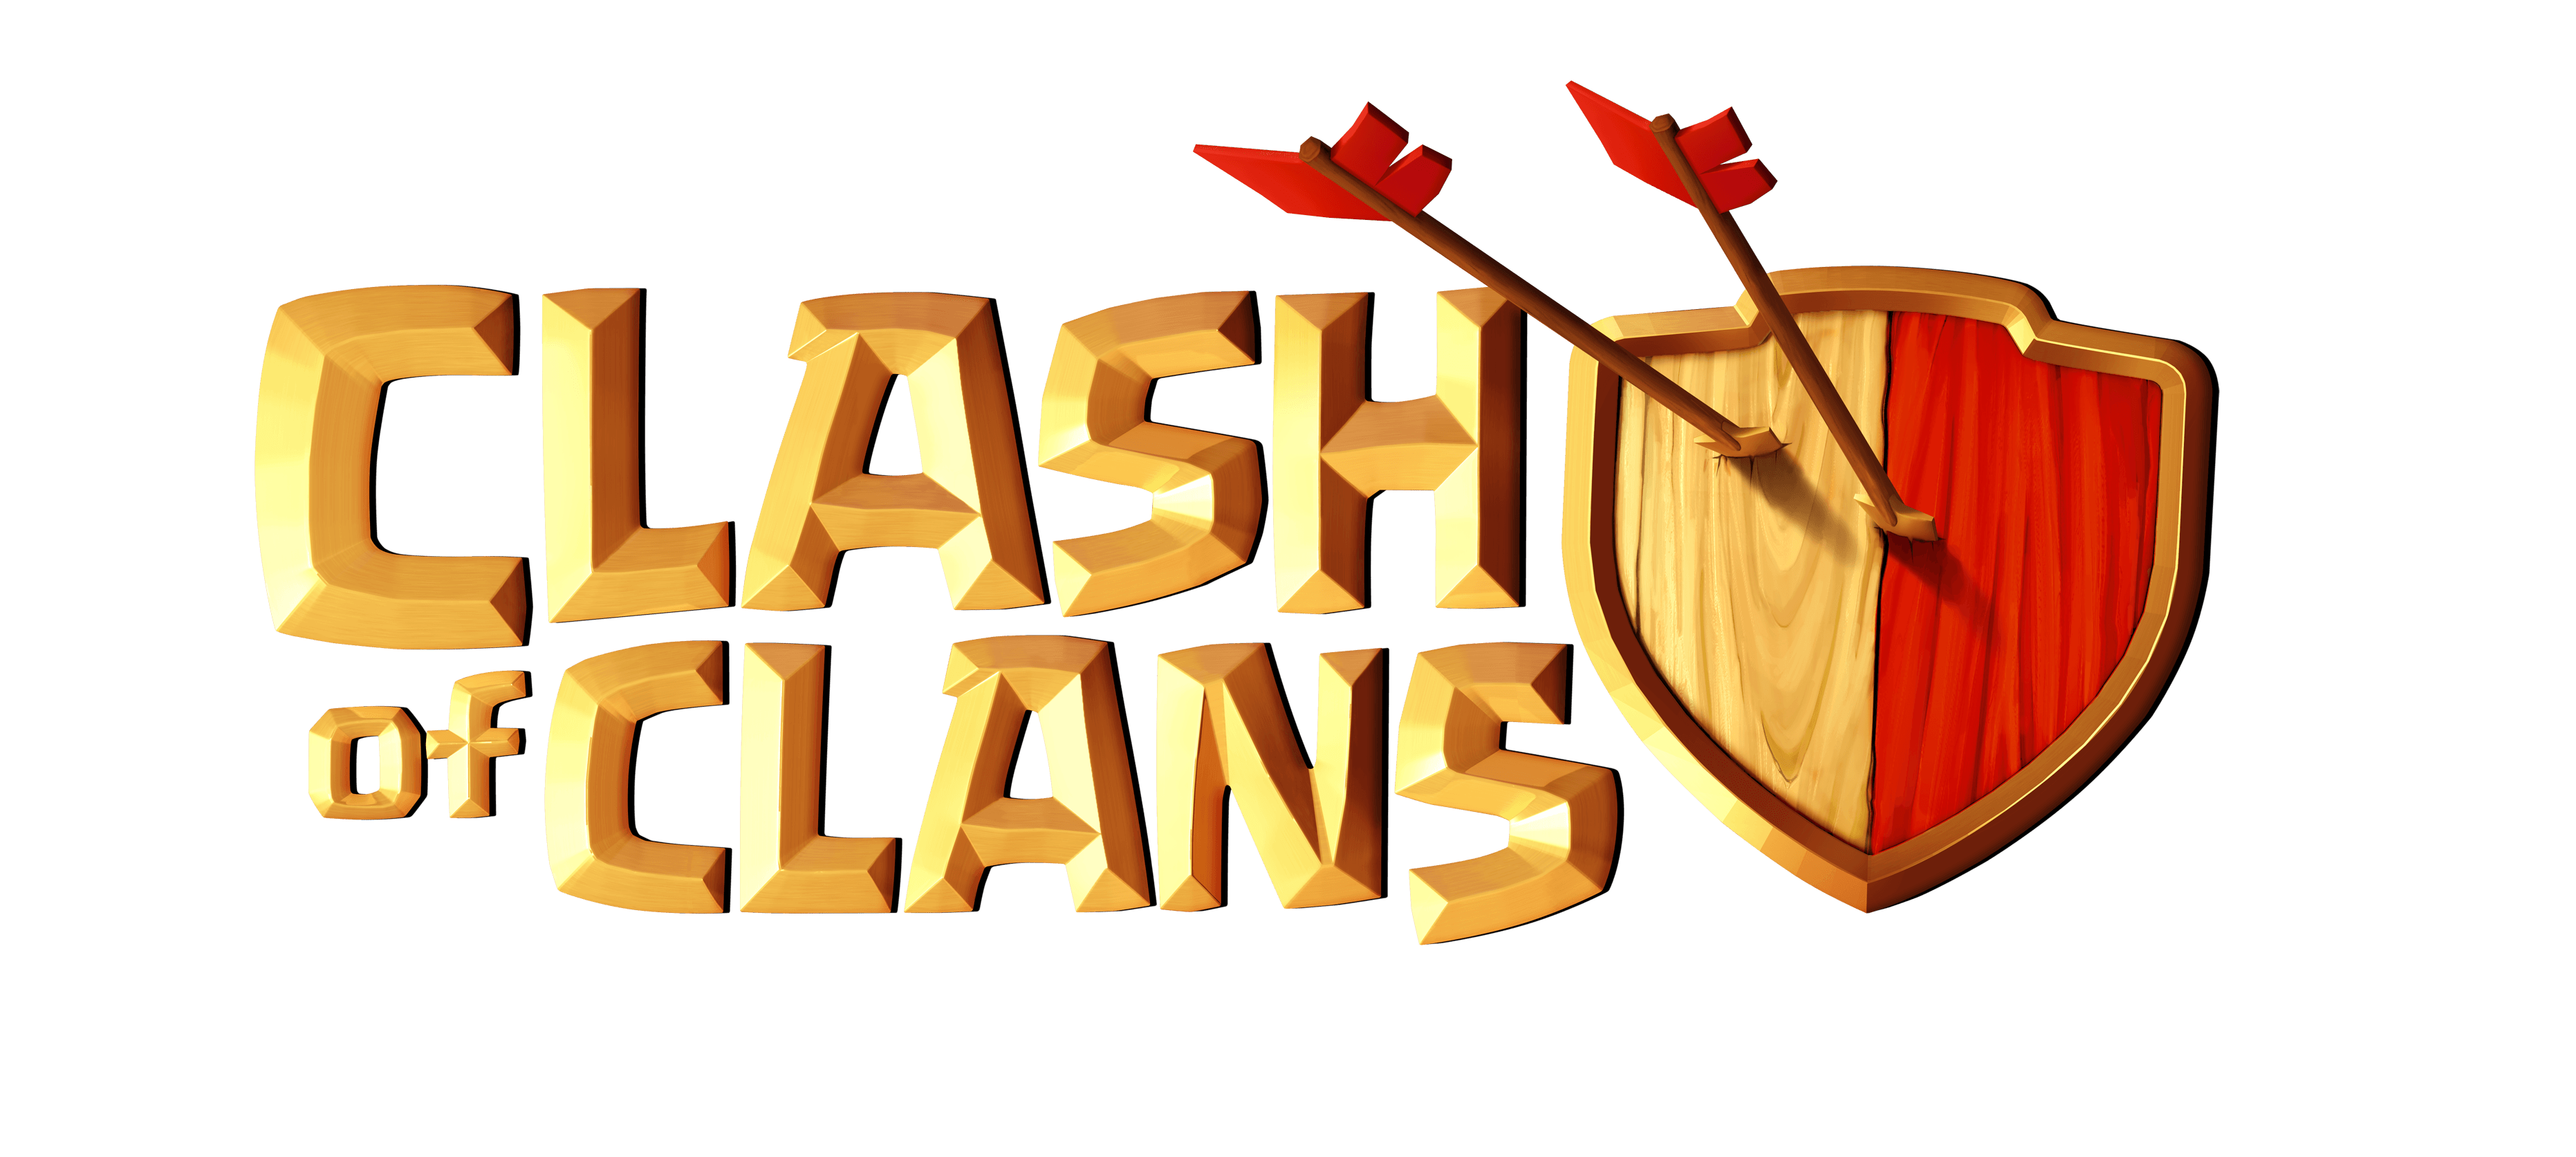 Clash Of Clans Logo No Background